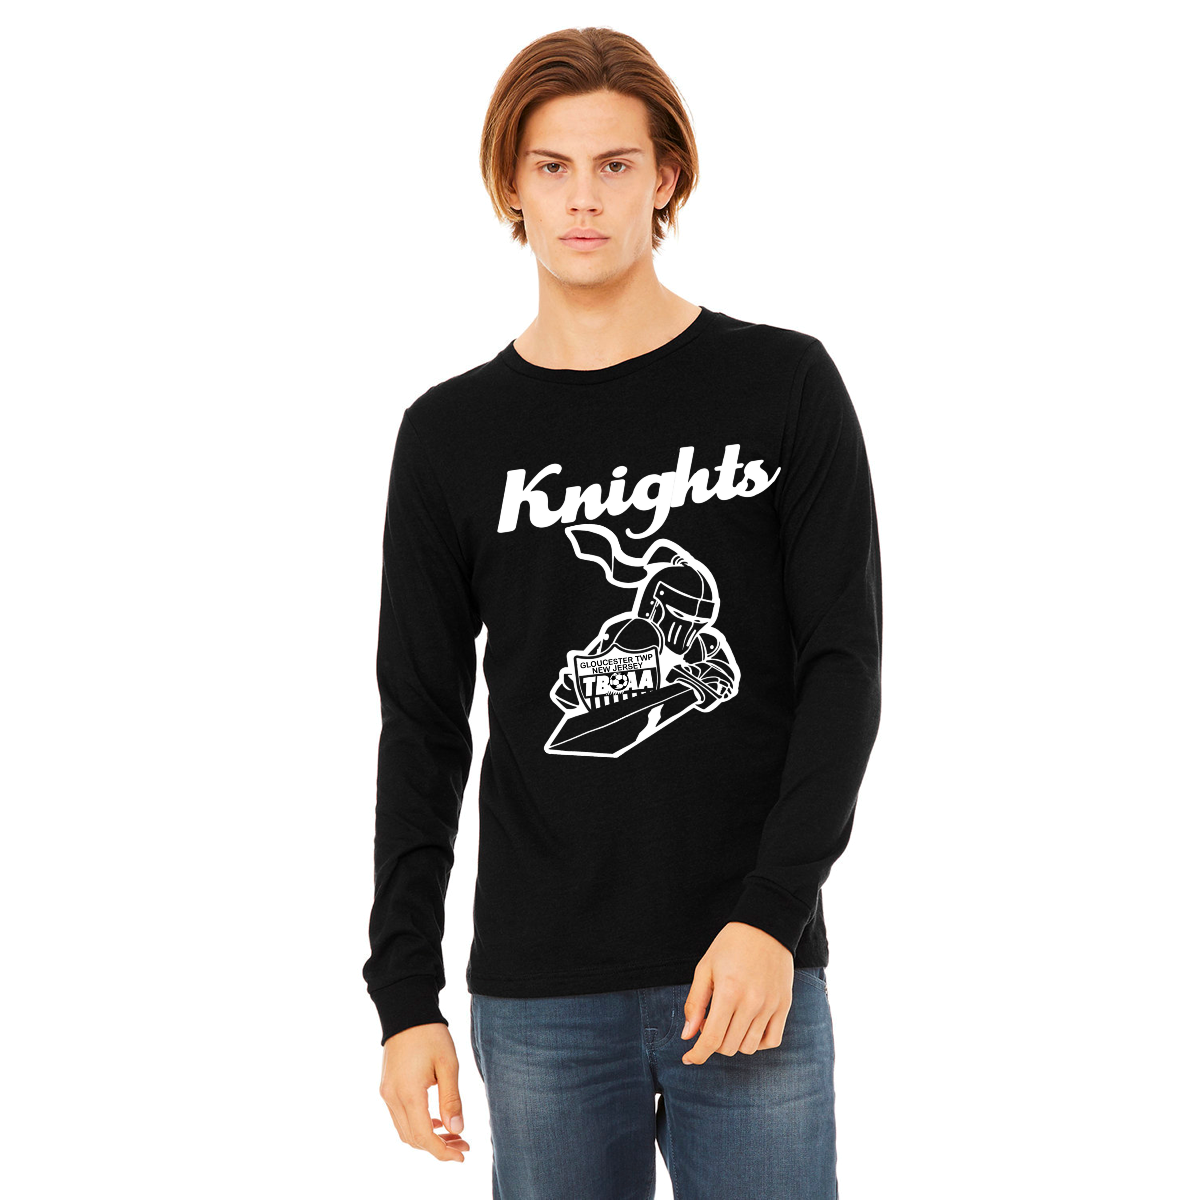 KNIGHTS Black Long Sleeve with White image